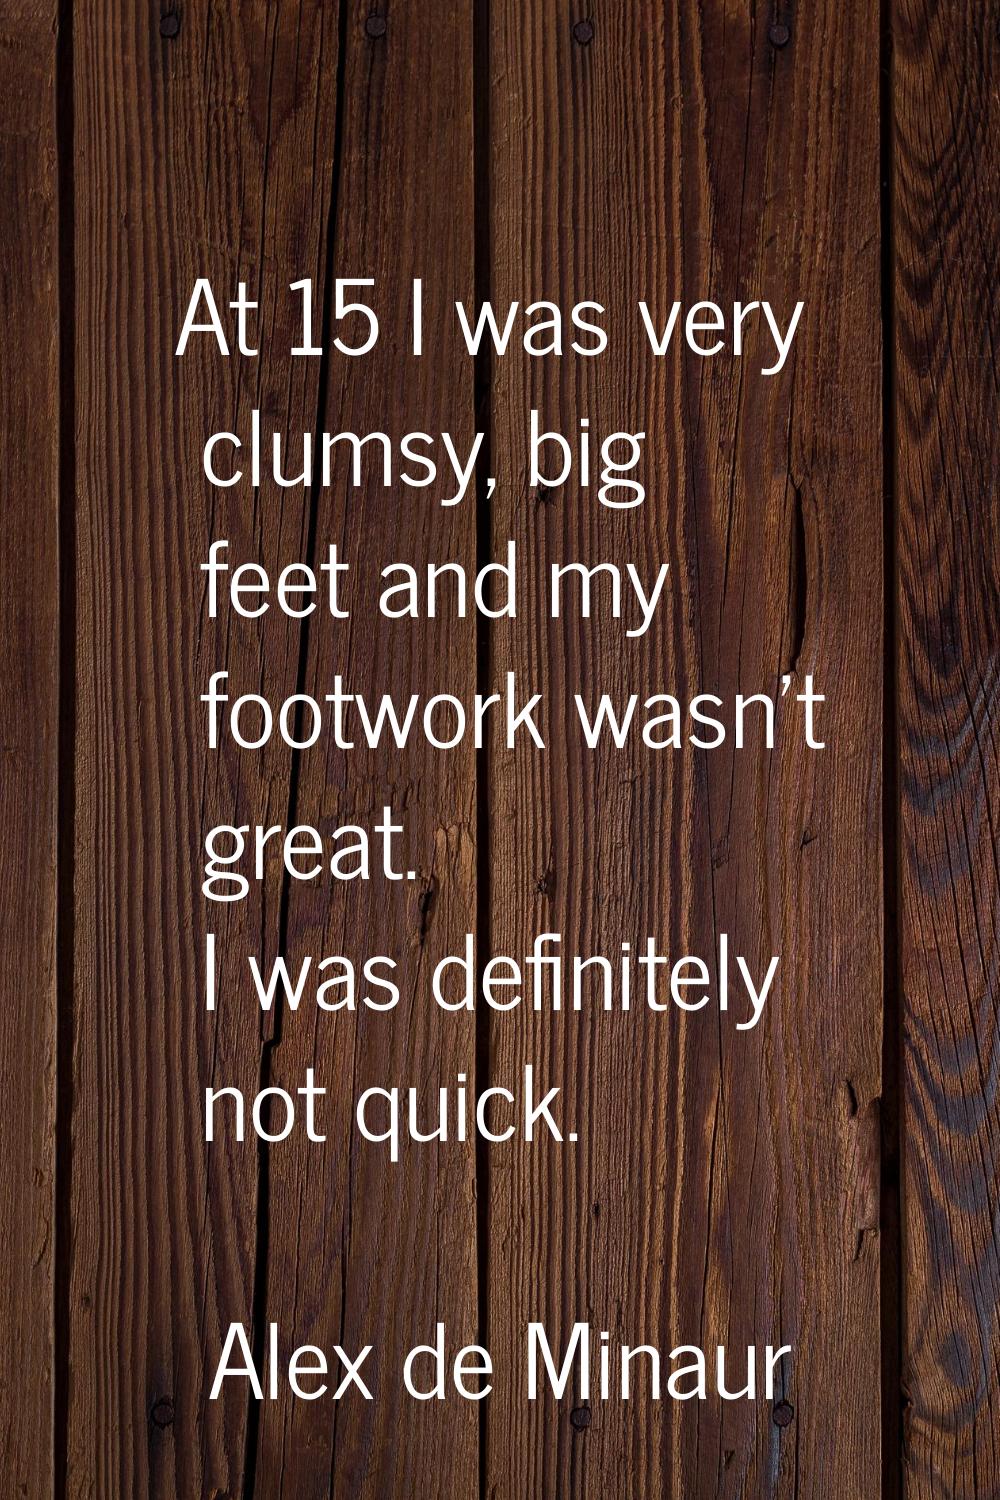 At 15 I was very clumsy, big feet and my footwork wasn’t great. I was definitely not quick.